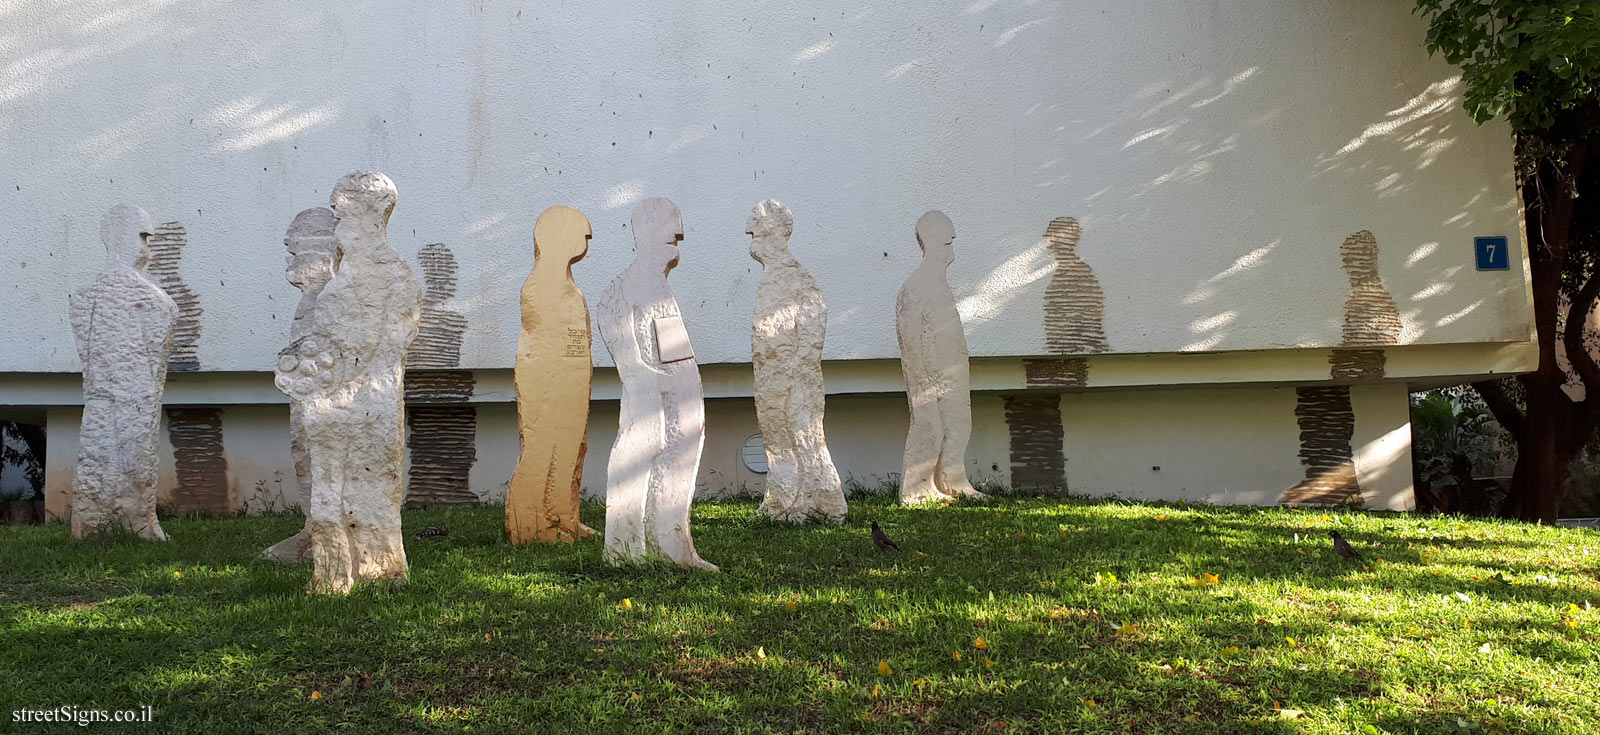 "Shadoes are Memories" - Outdoor sculpture by Siona Shimshi - Lassalle St 7, Tel Aviv-Yafo, Israel